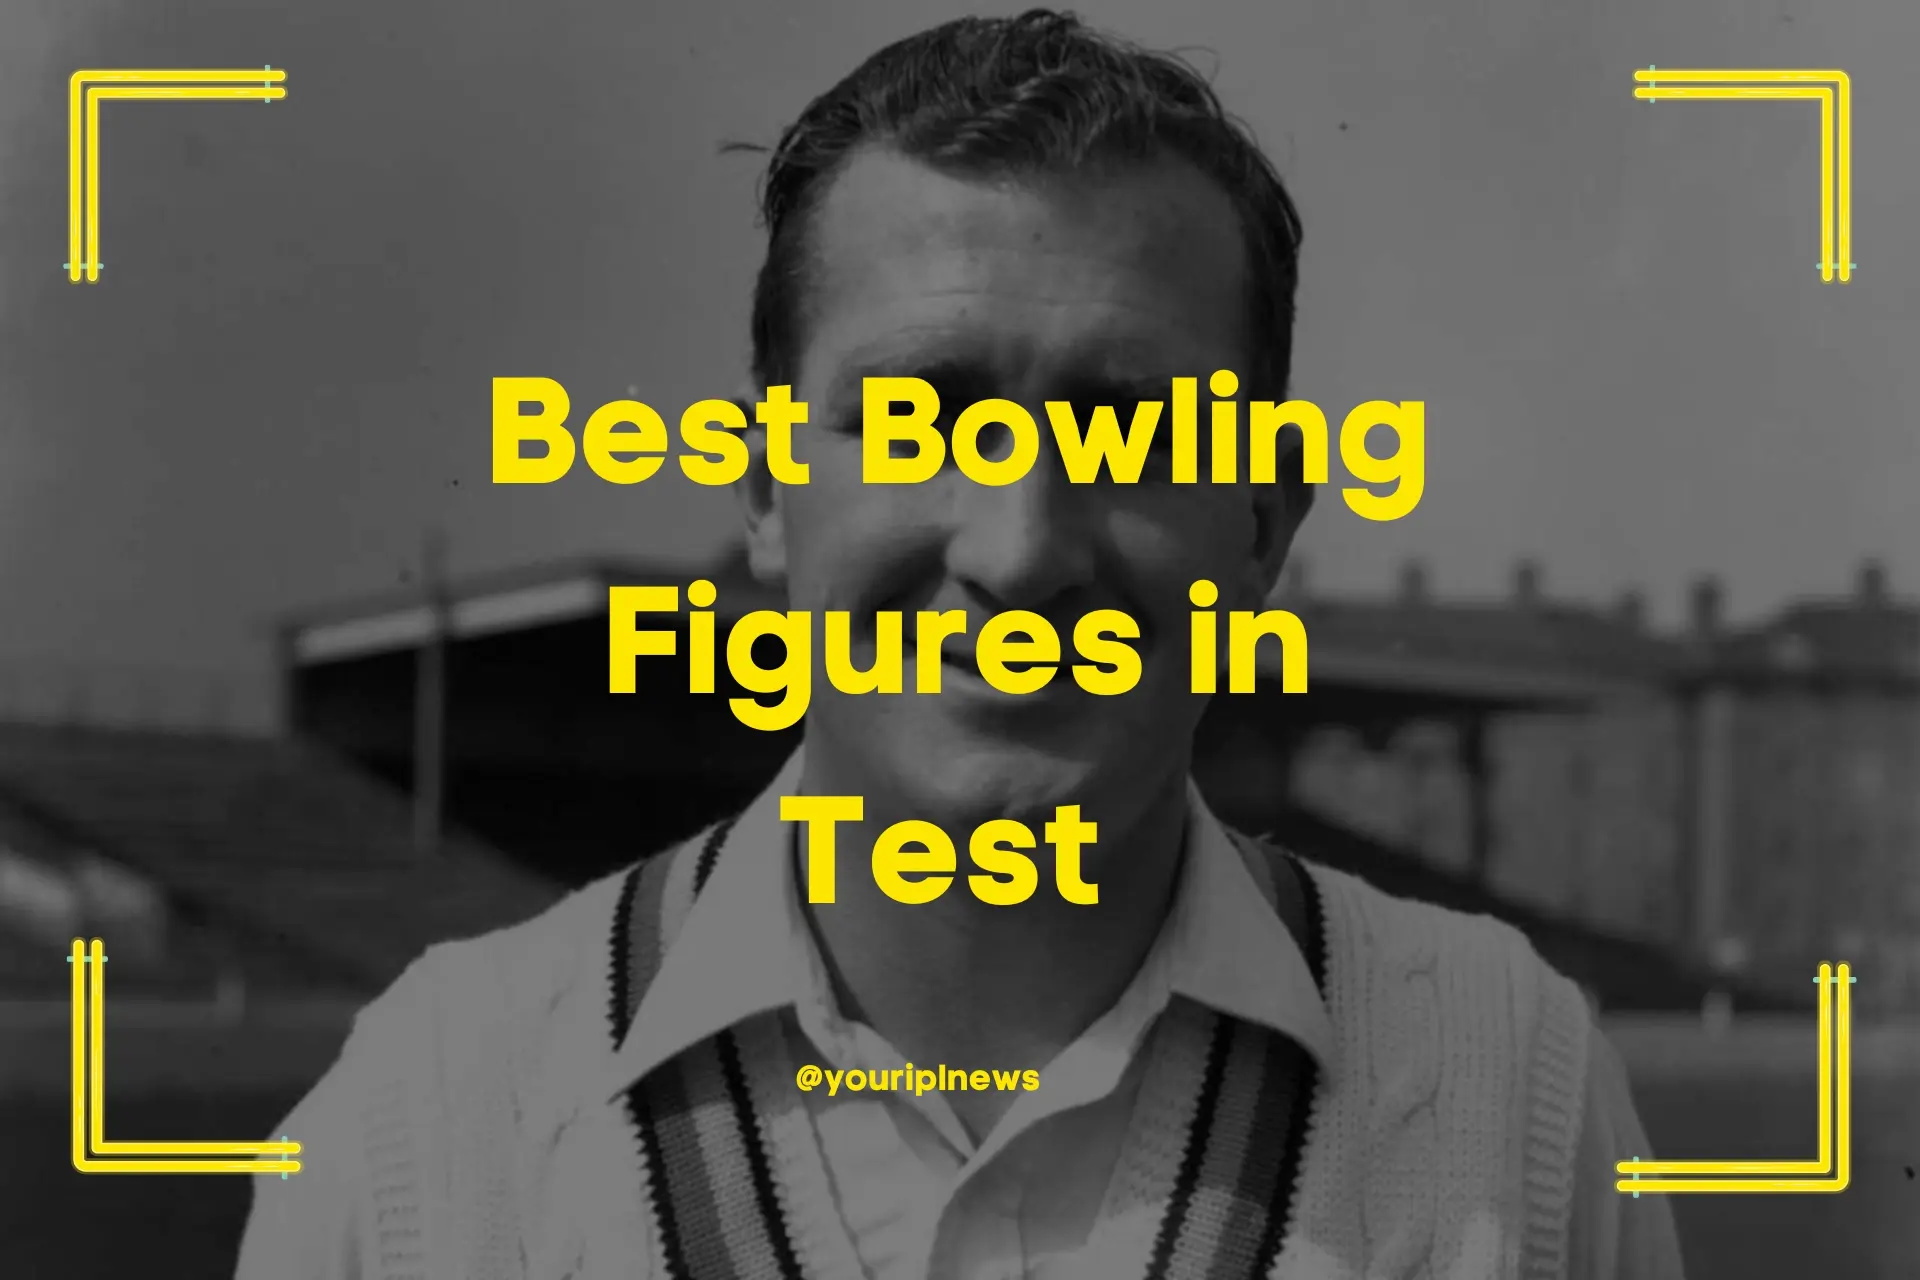 Best Bowling Figures in Test